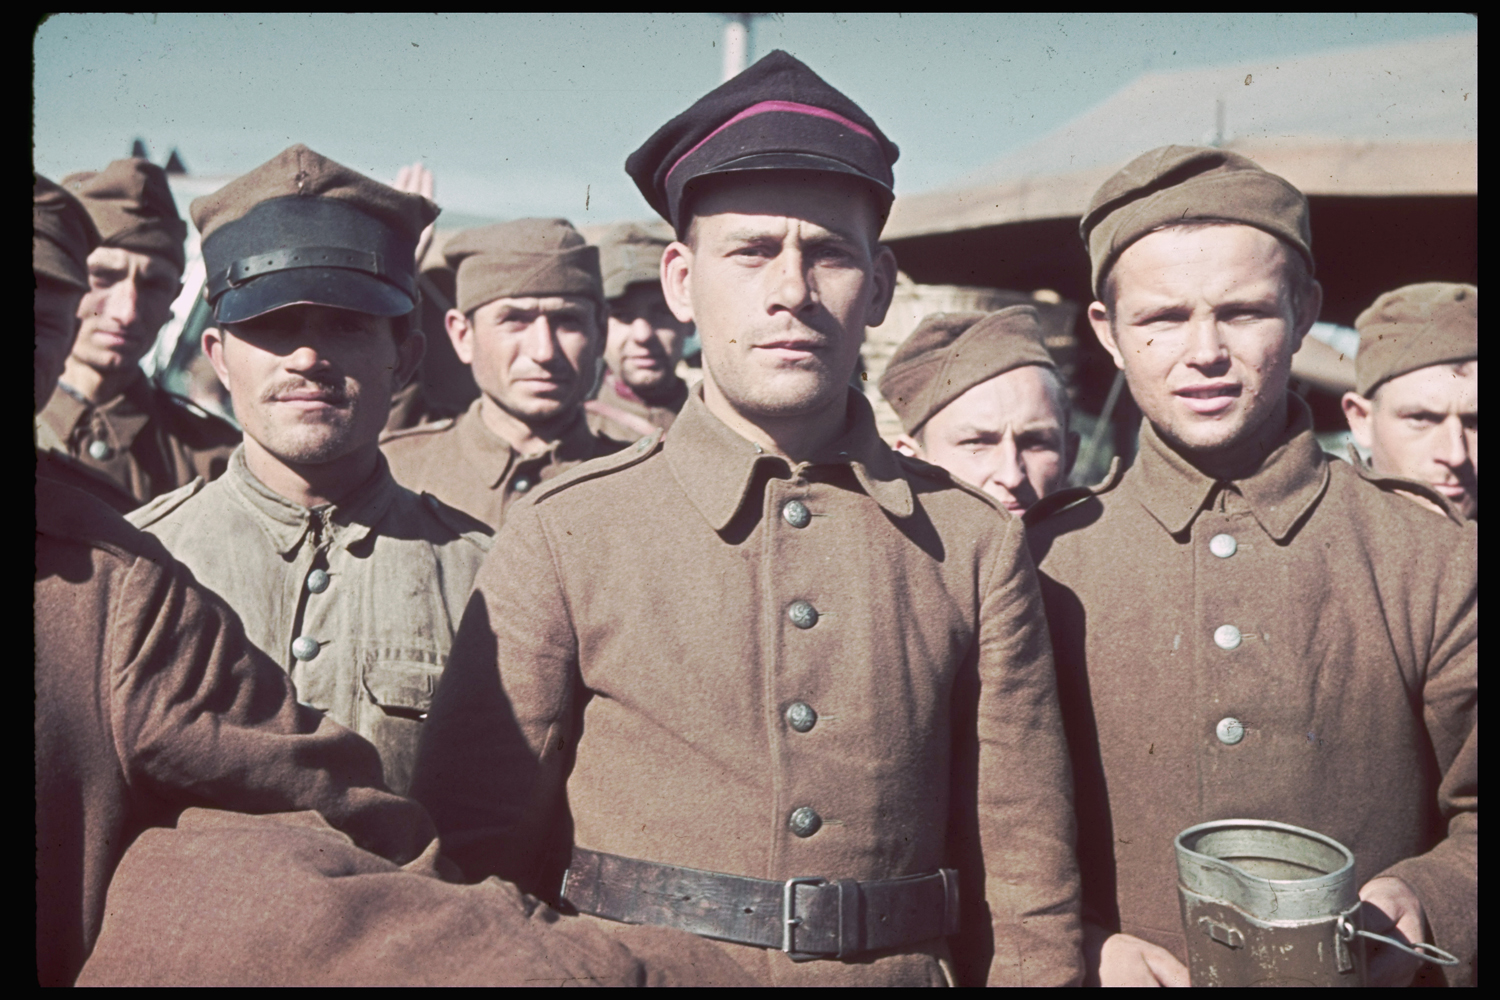 Captured Polish soldiers, 1939.